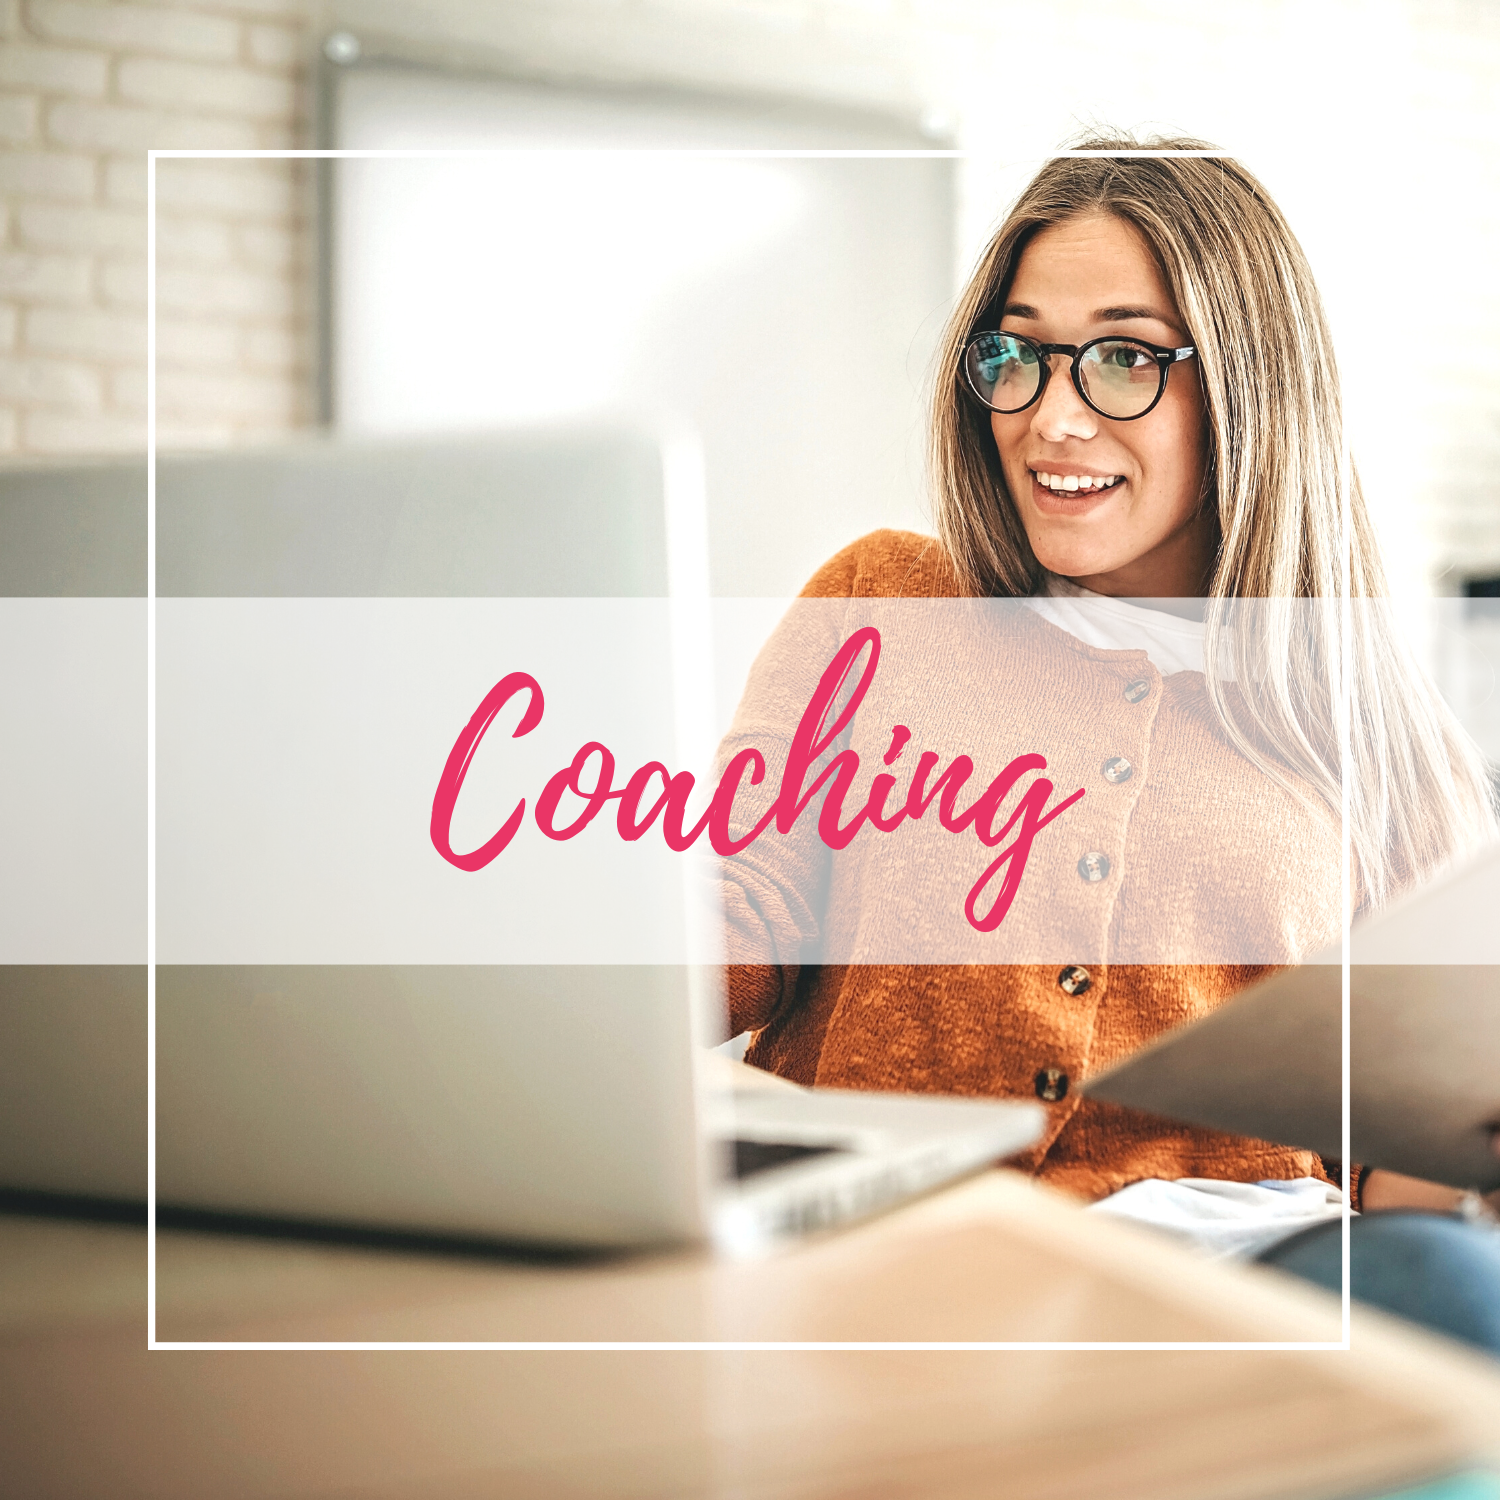 Coaching will transform your life! Book your free Connection Call today!